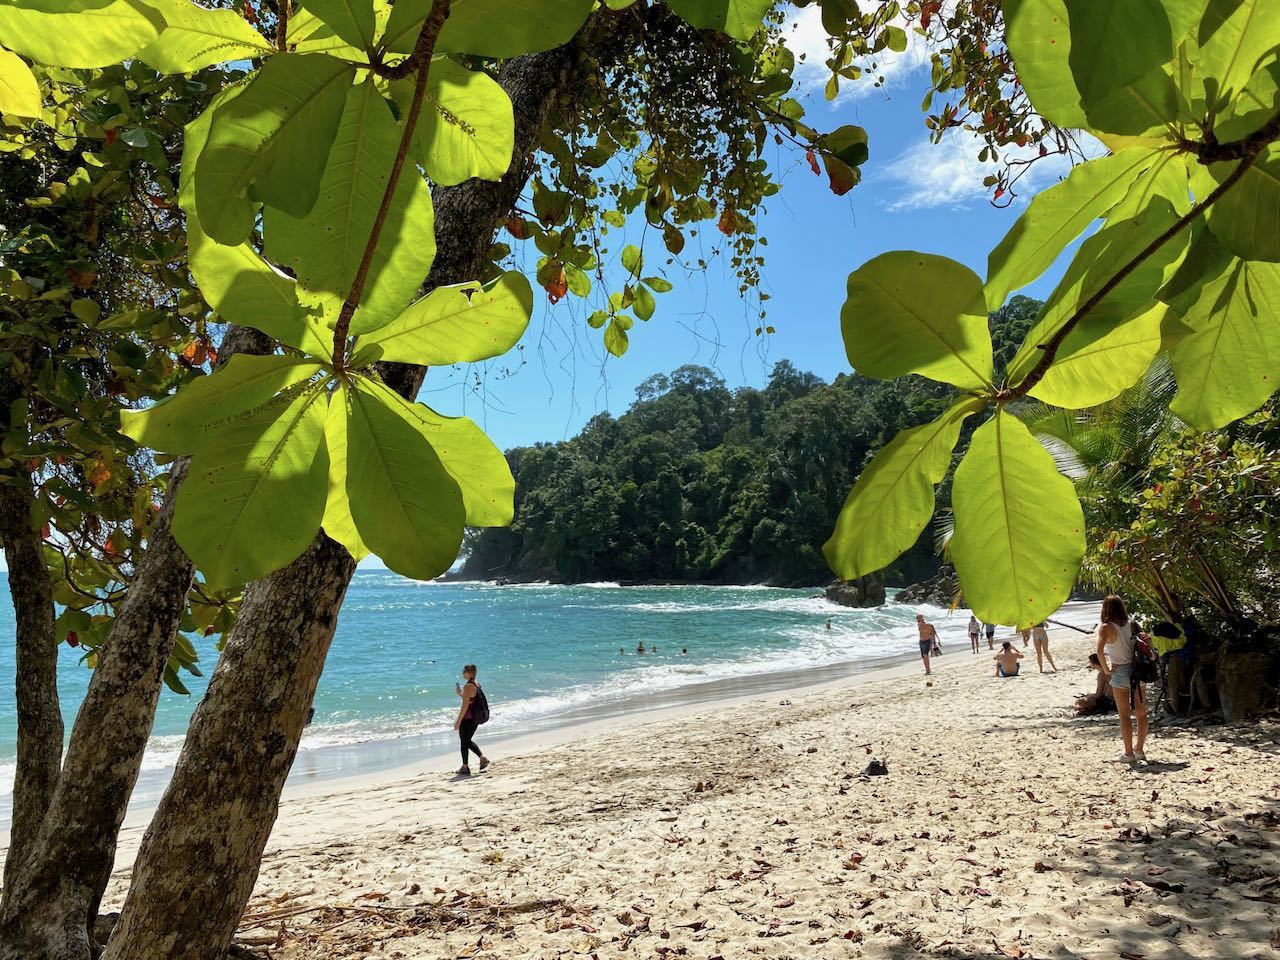 View of sandy beach through the trees in Manuel Antonio National Park